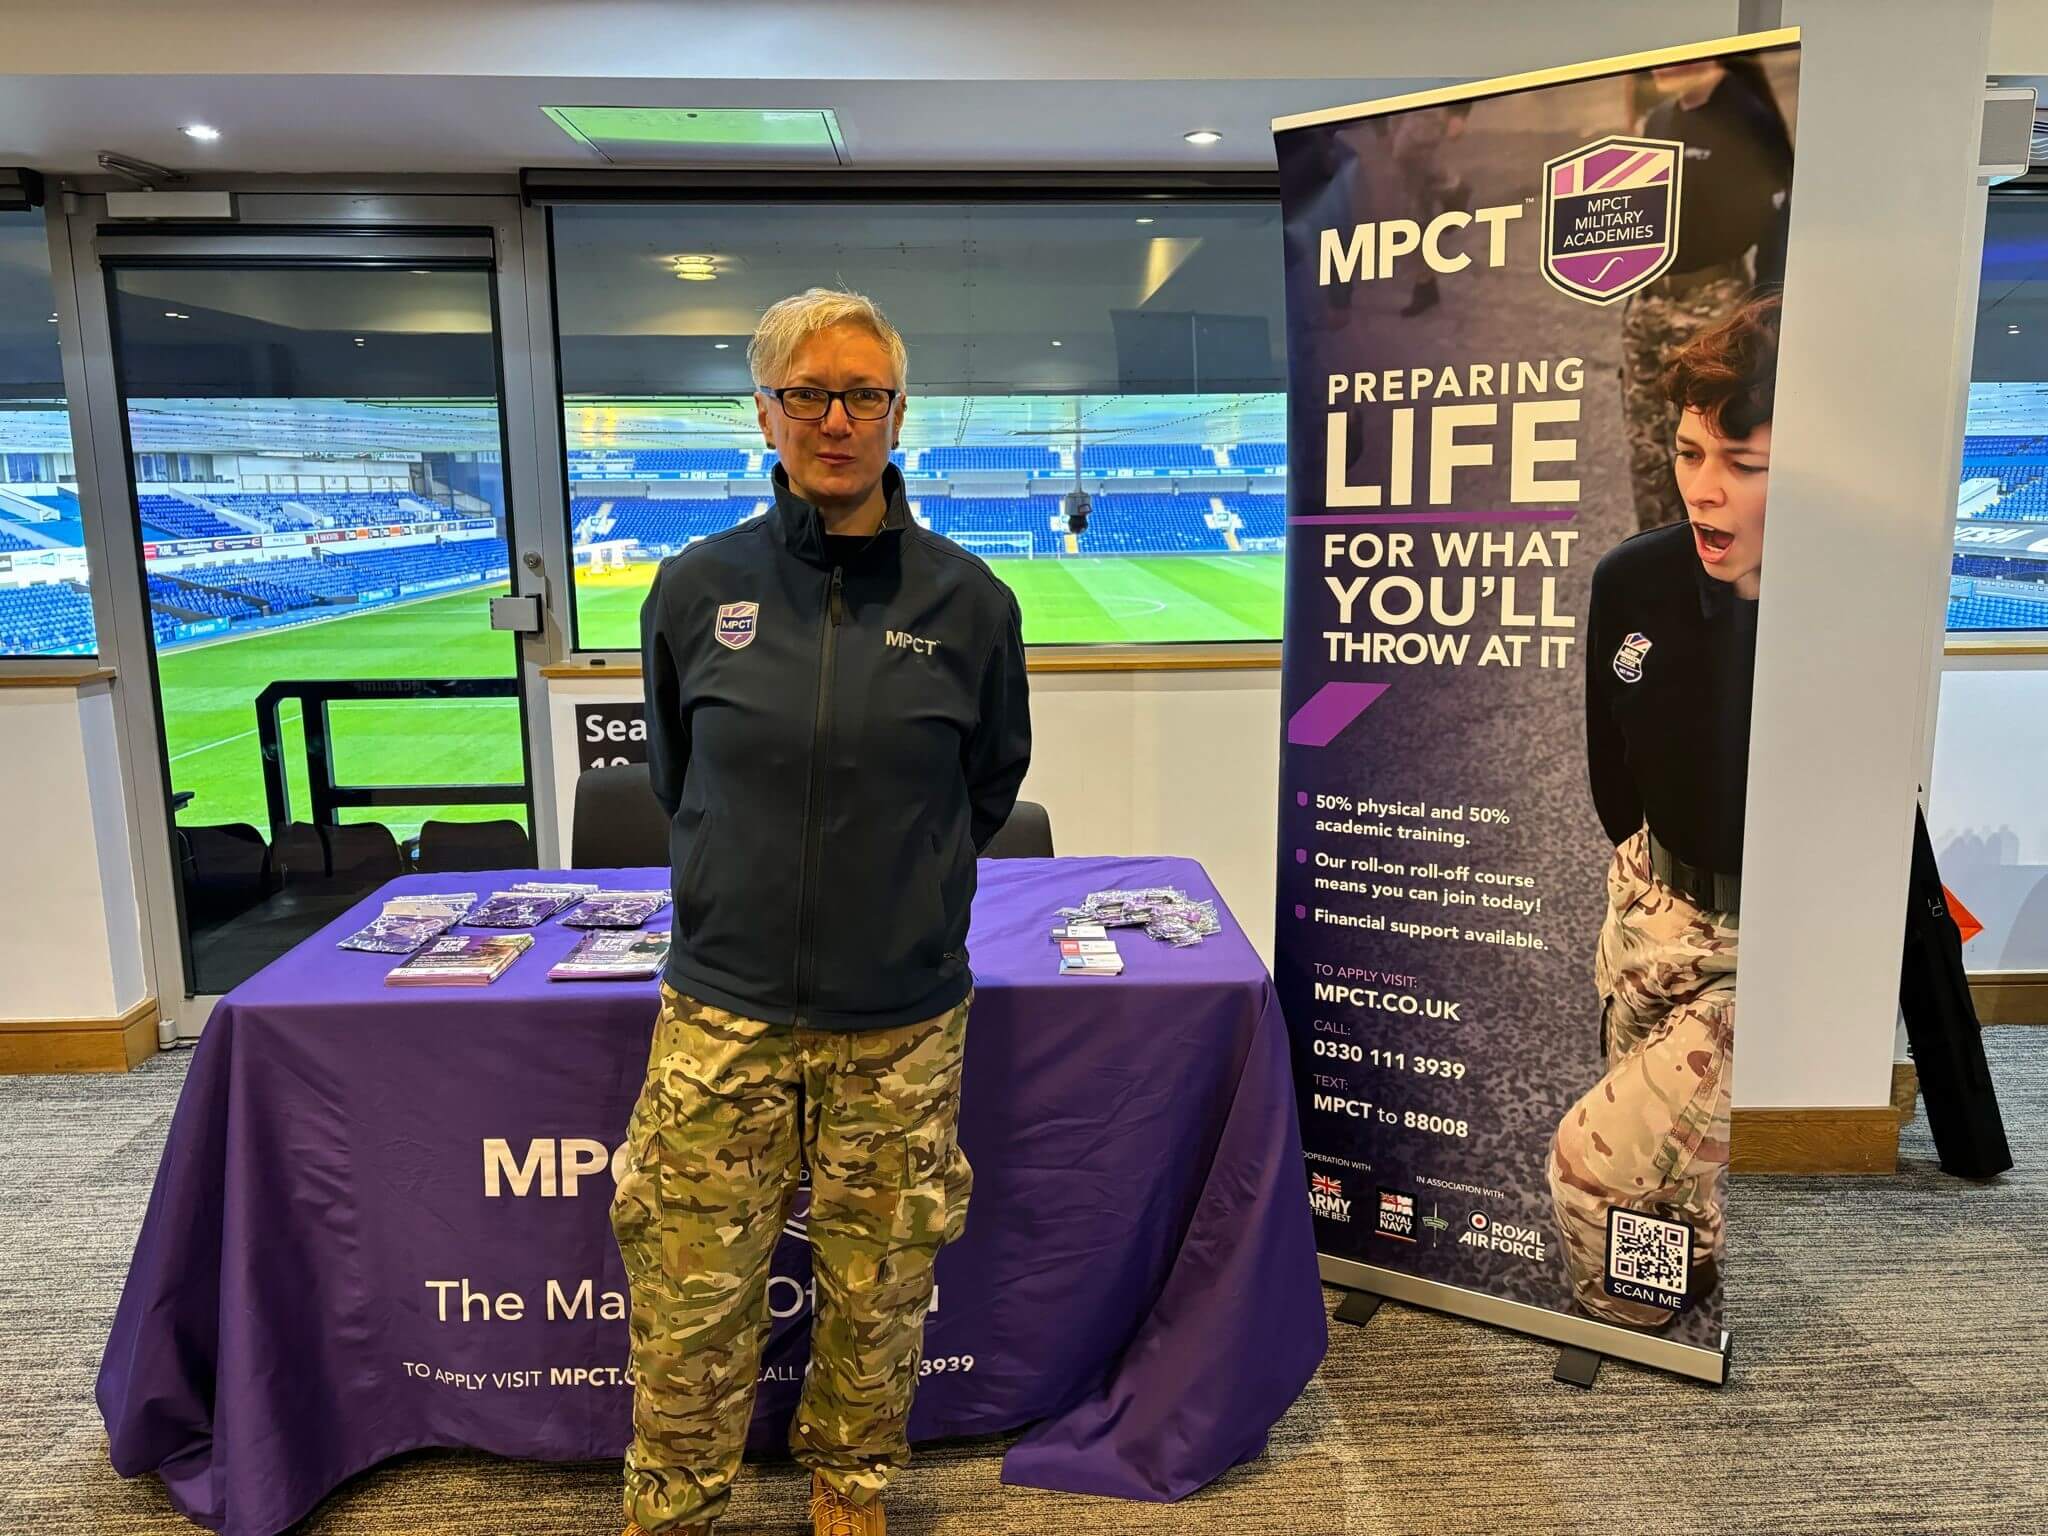 MPCT at our event in Ipswich